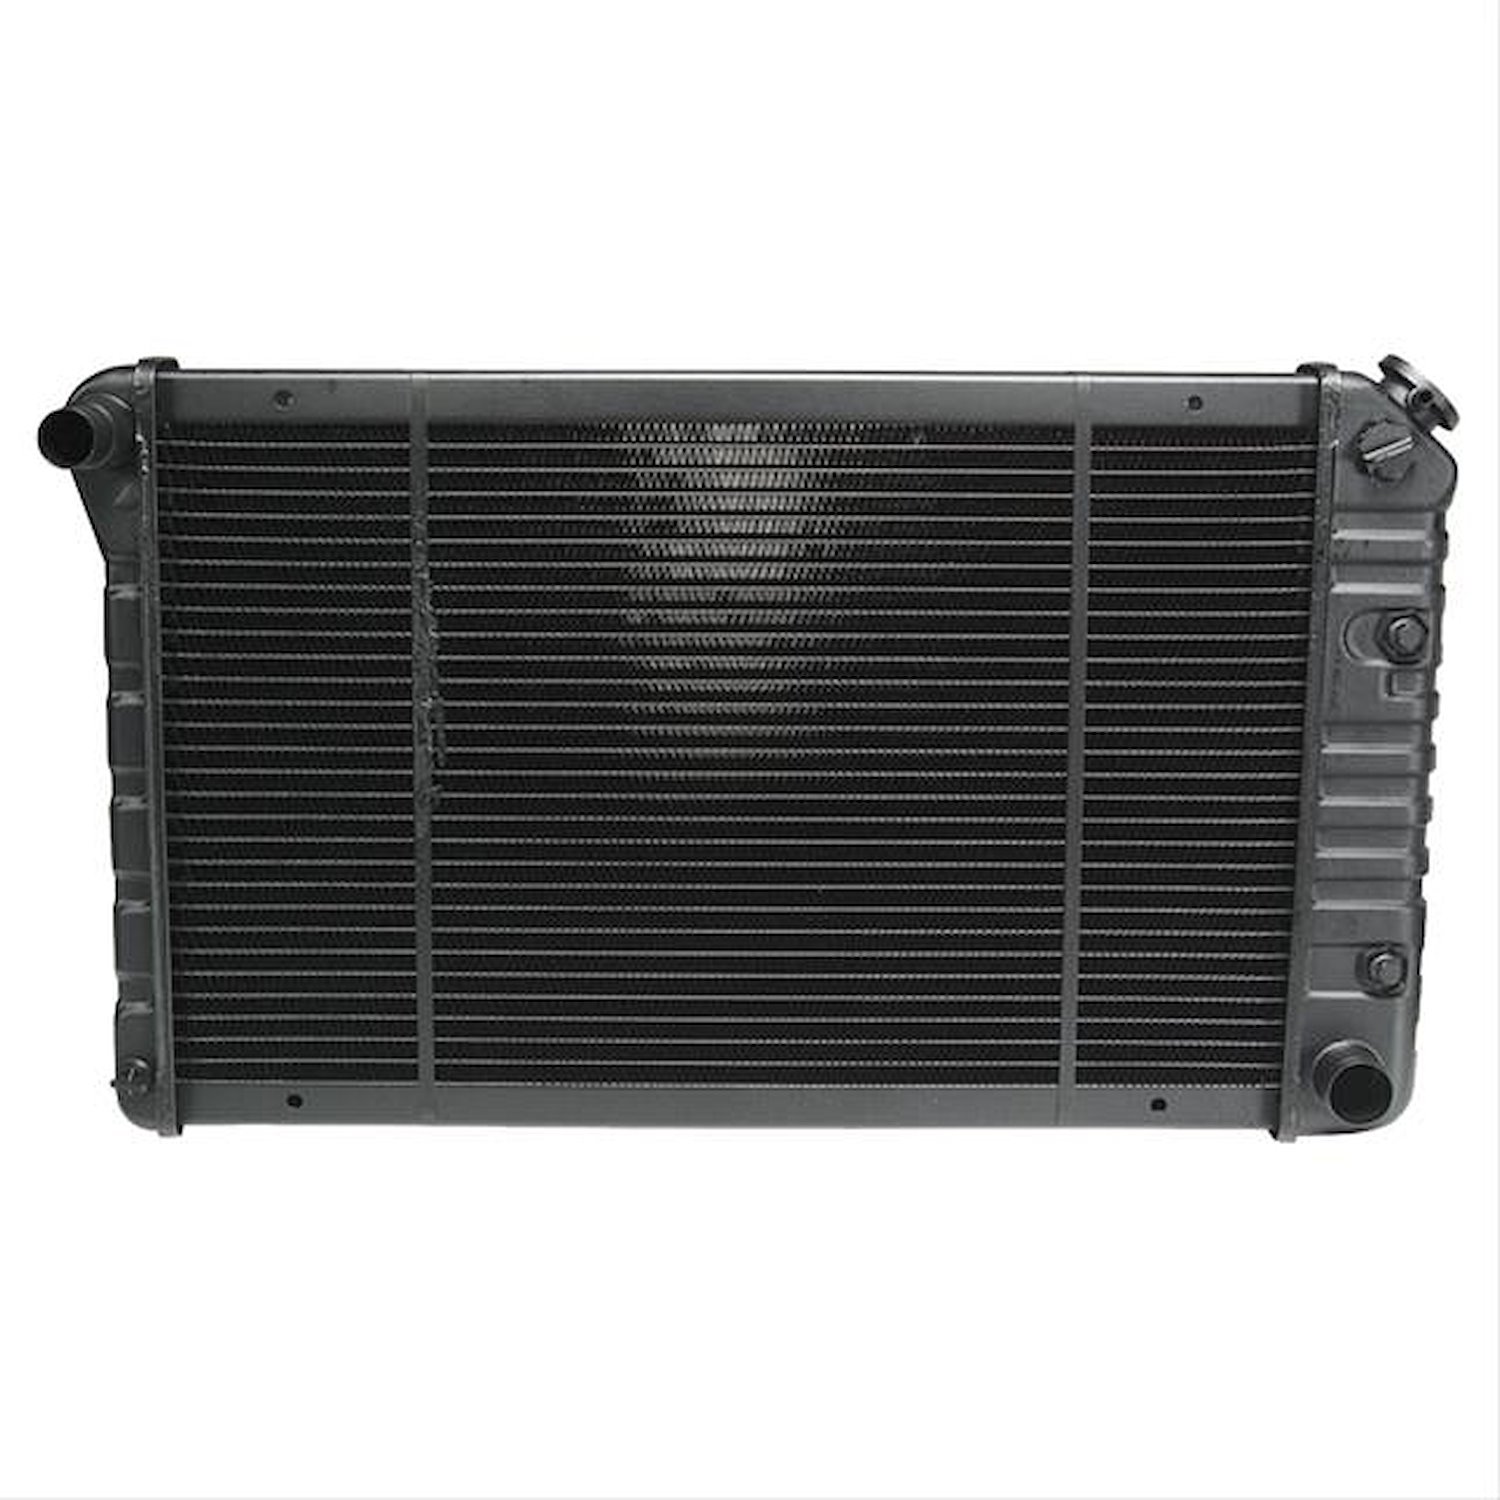 Replacement Radiator Fits Select 1966-1971 Chevrolet, Oldsmobile & Pontiac Models [4-Row]